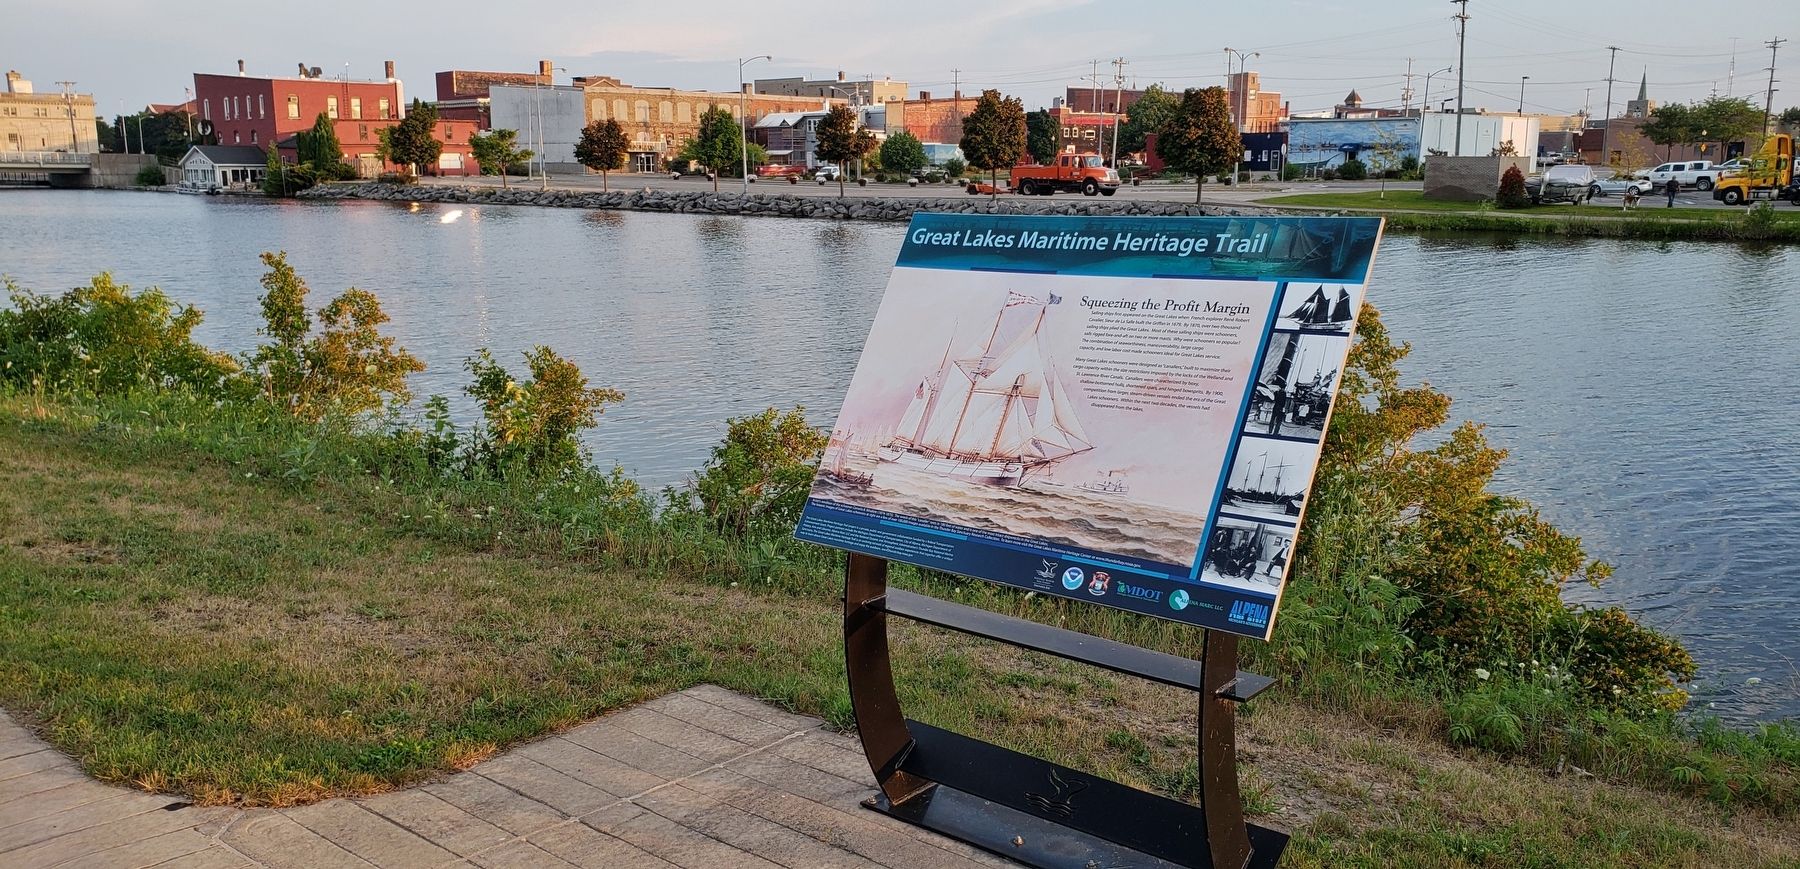 Squeezing The Profit Margin Marker (<i>wide view; Thunder Bay River in background</i>) image. Click for full size.